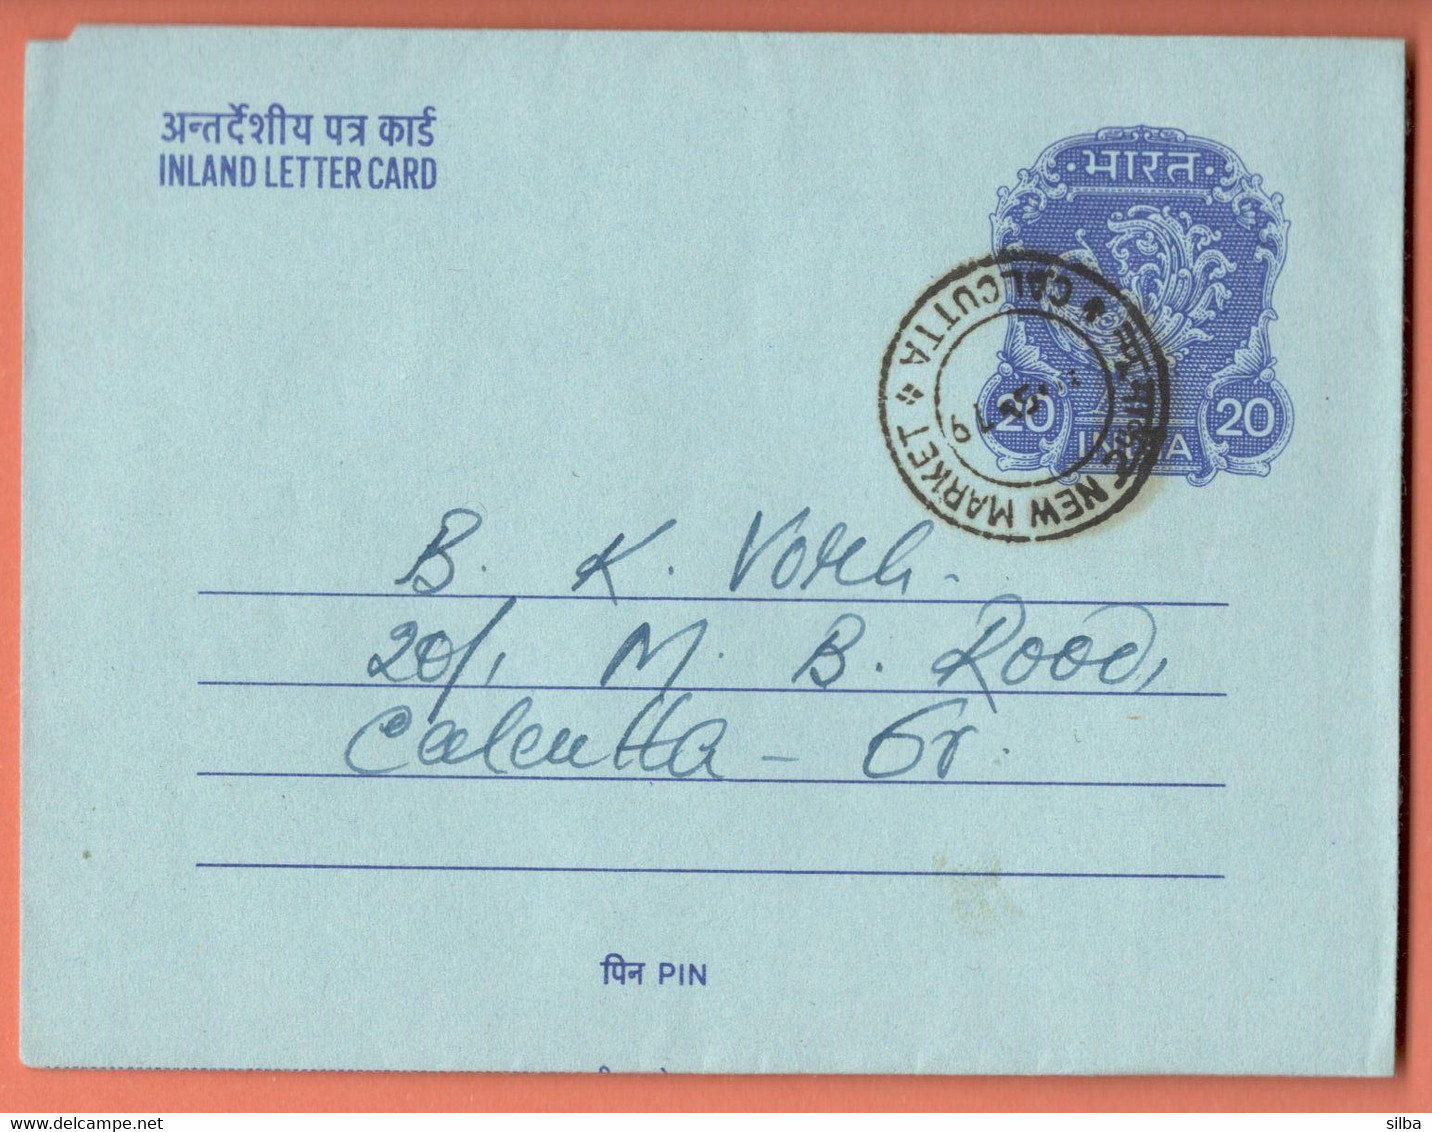 India Inland Letter / Peacock 20 Postal Stationery / Travellers Cheques, State Bank Of India 5000 Offices - Inland Letter Cards